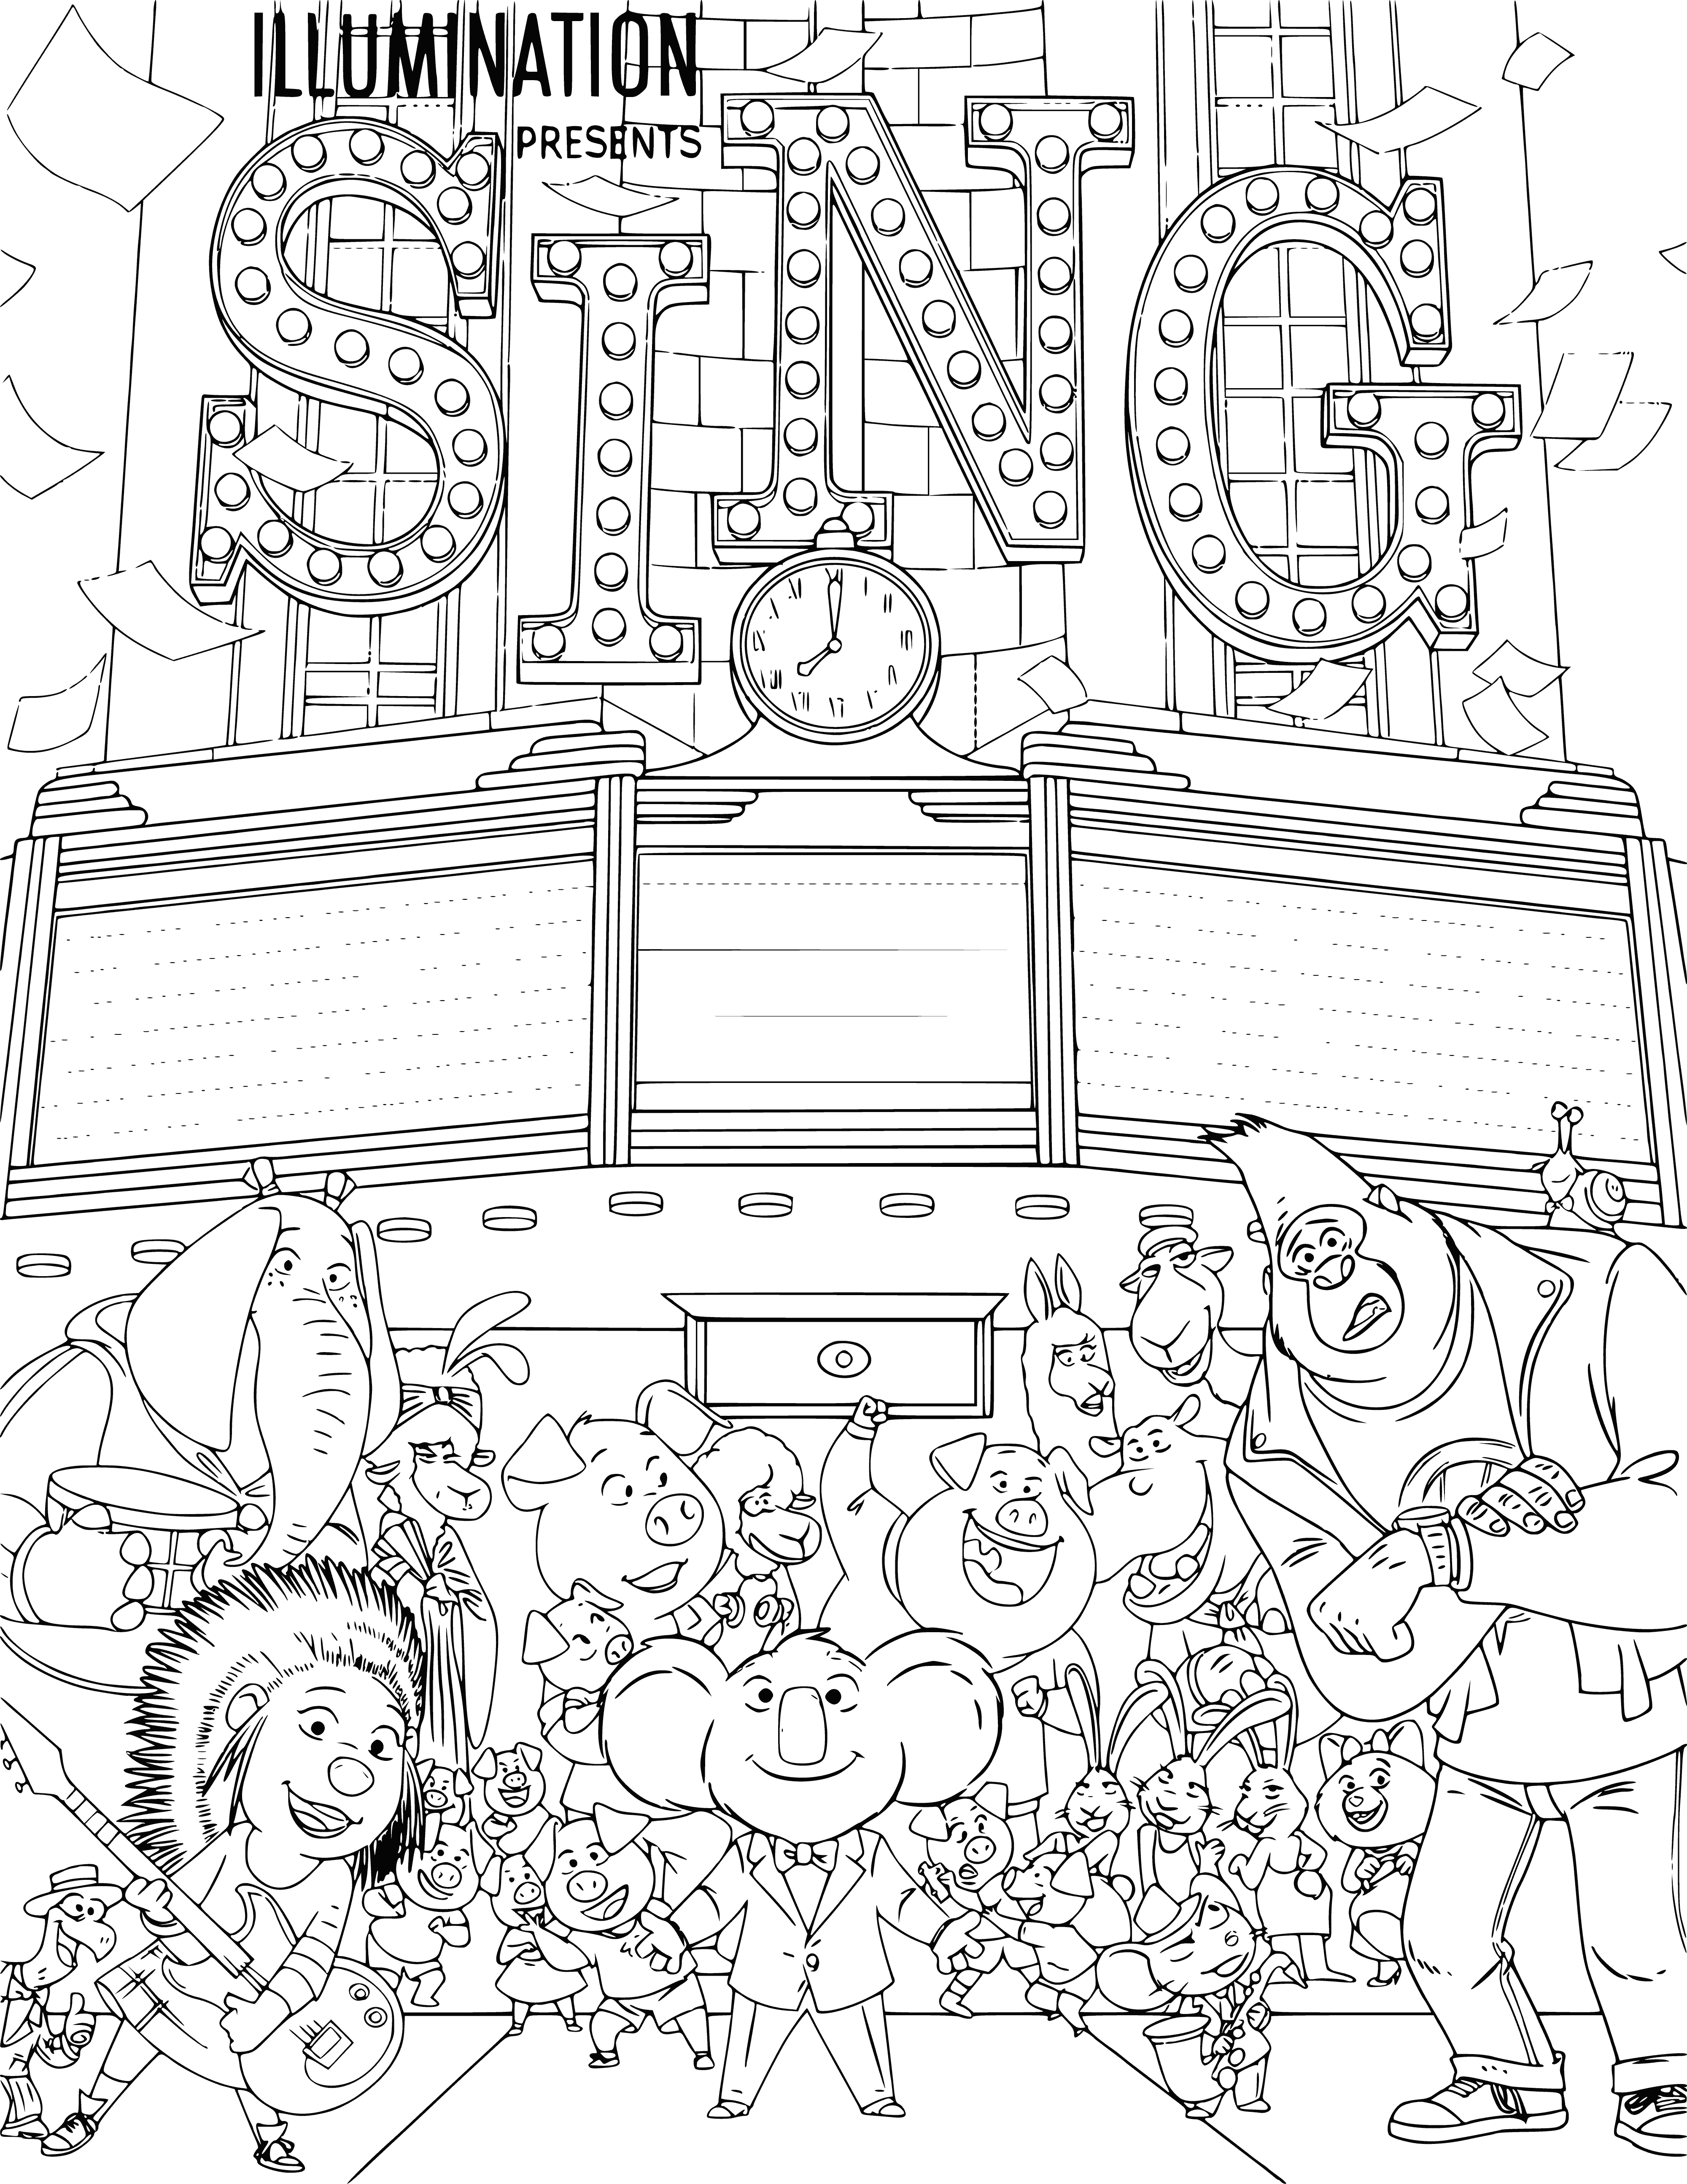 Cartoon characters coloring page